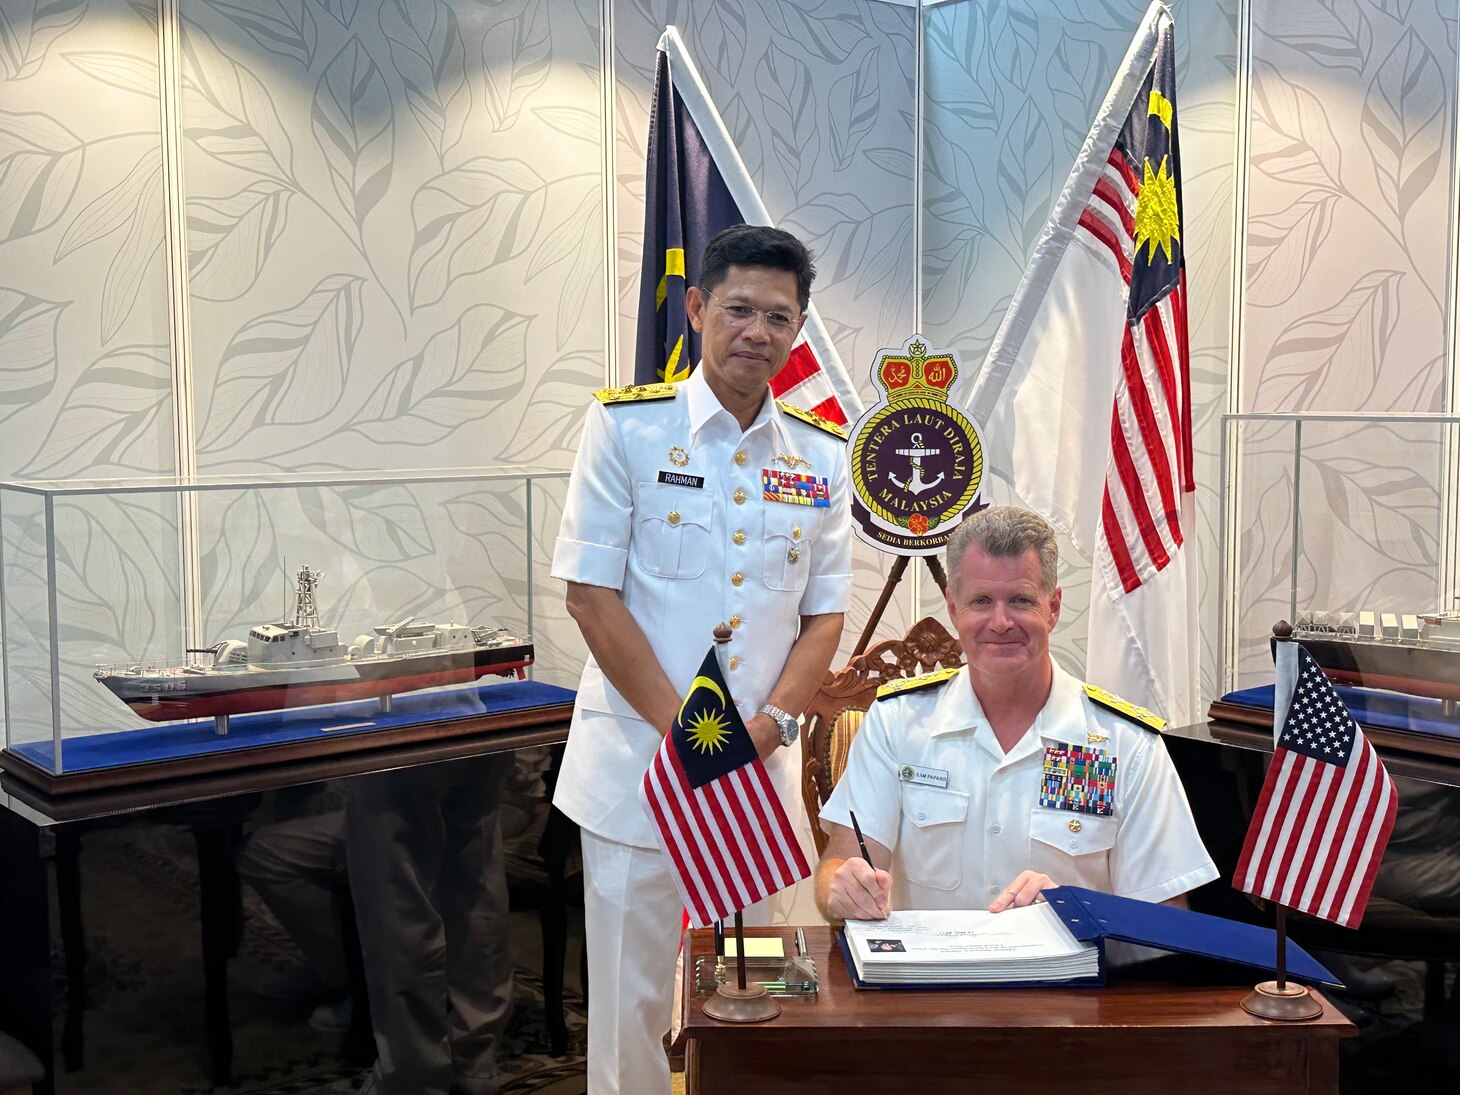 Adm. Samuel Paparo, commander, U.S. Pacific Fleet, and Adm. Datuk Abdul Rahman bin Ayob, chief of navy, Royal Malaysian Navy, pose for a photo during a bilateral meeting at Langkawi International Maritime and Aerospace Exhibition 2023 in Langkawi, Malaysia, May 24, 2023. The visit to Malaysia underscored the United States’ commitment to strengthening alliances and partnerships for an enduring resilient, free and open Indo-Pacific. (U.S. Navy courtesy photo)